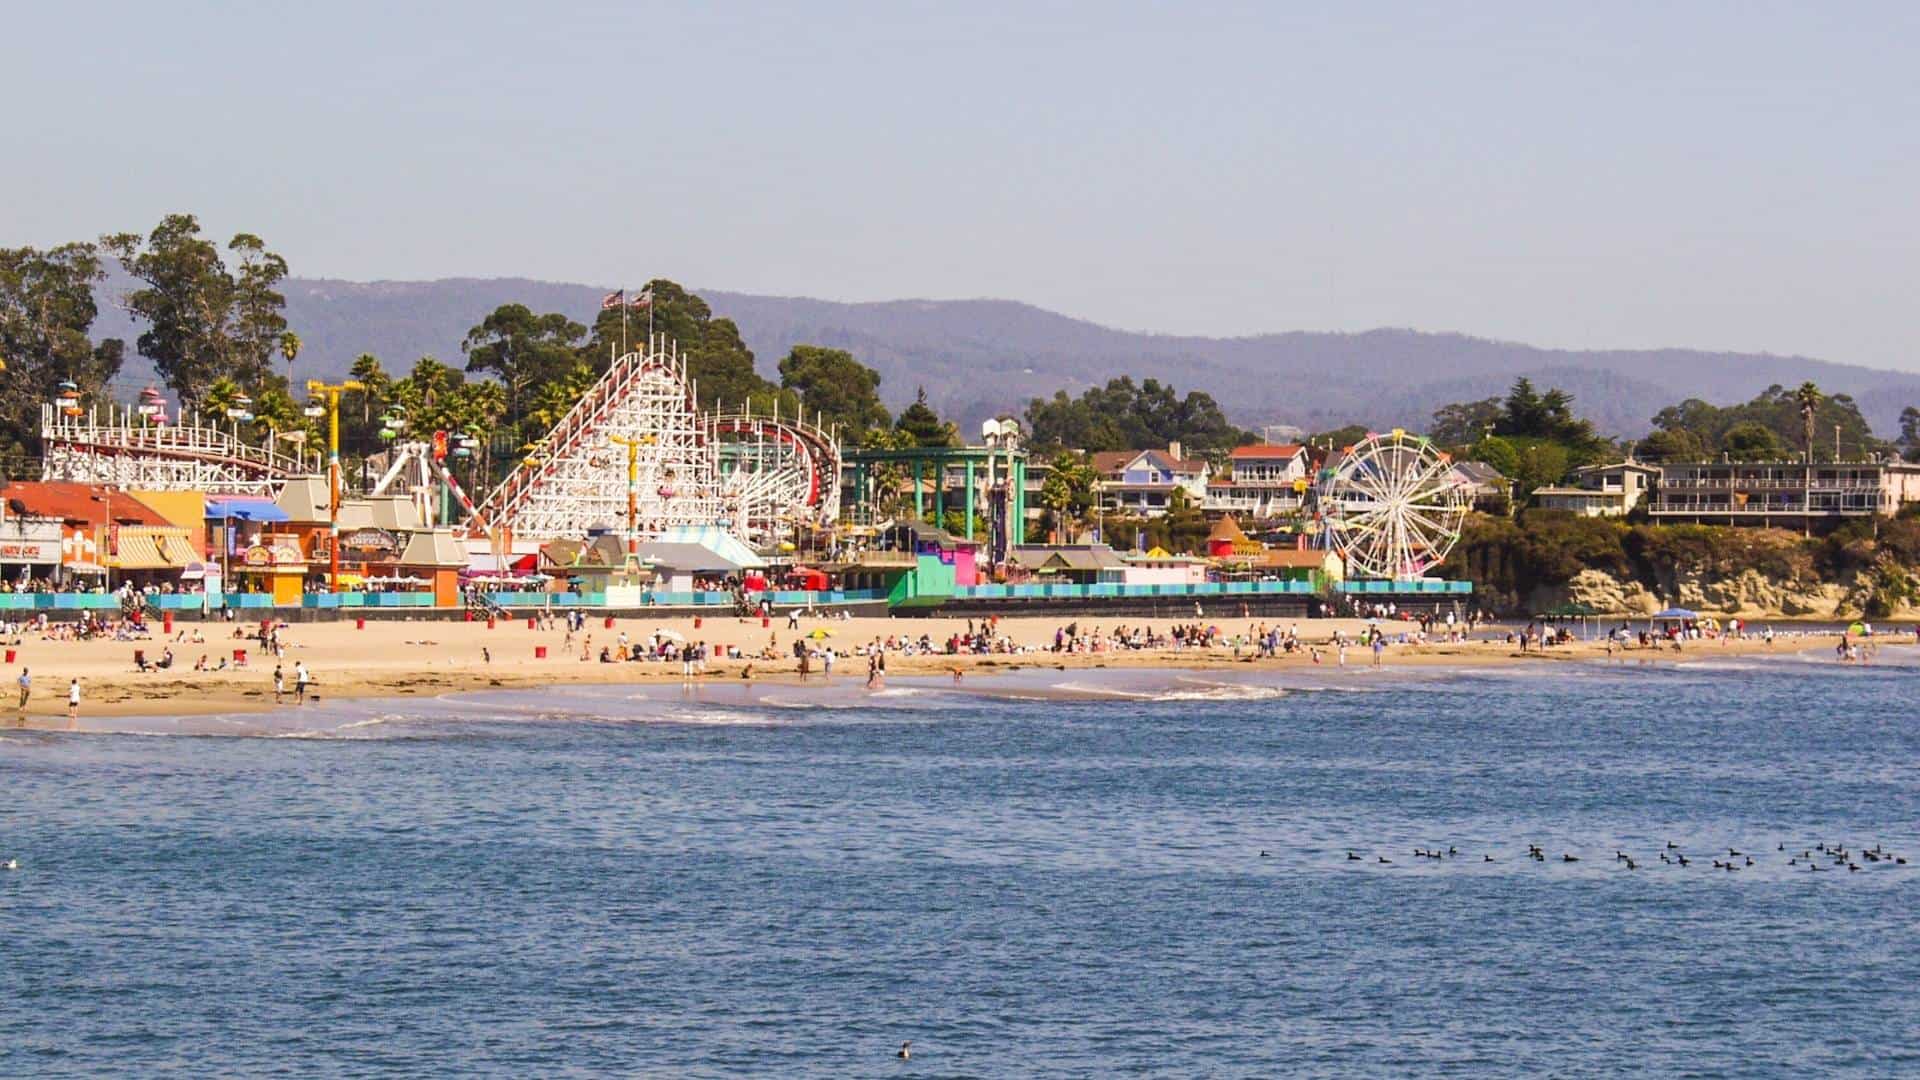 Over 30 Fun Things to do in Santa Cruz with Kids!